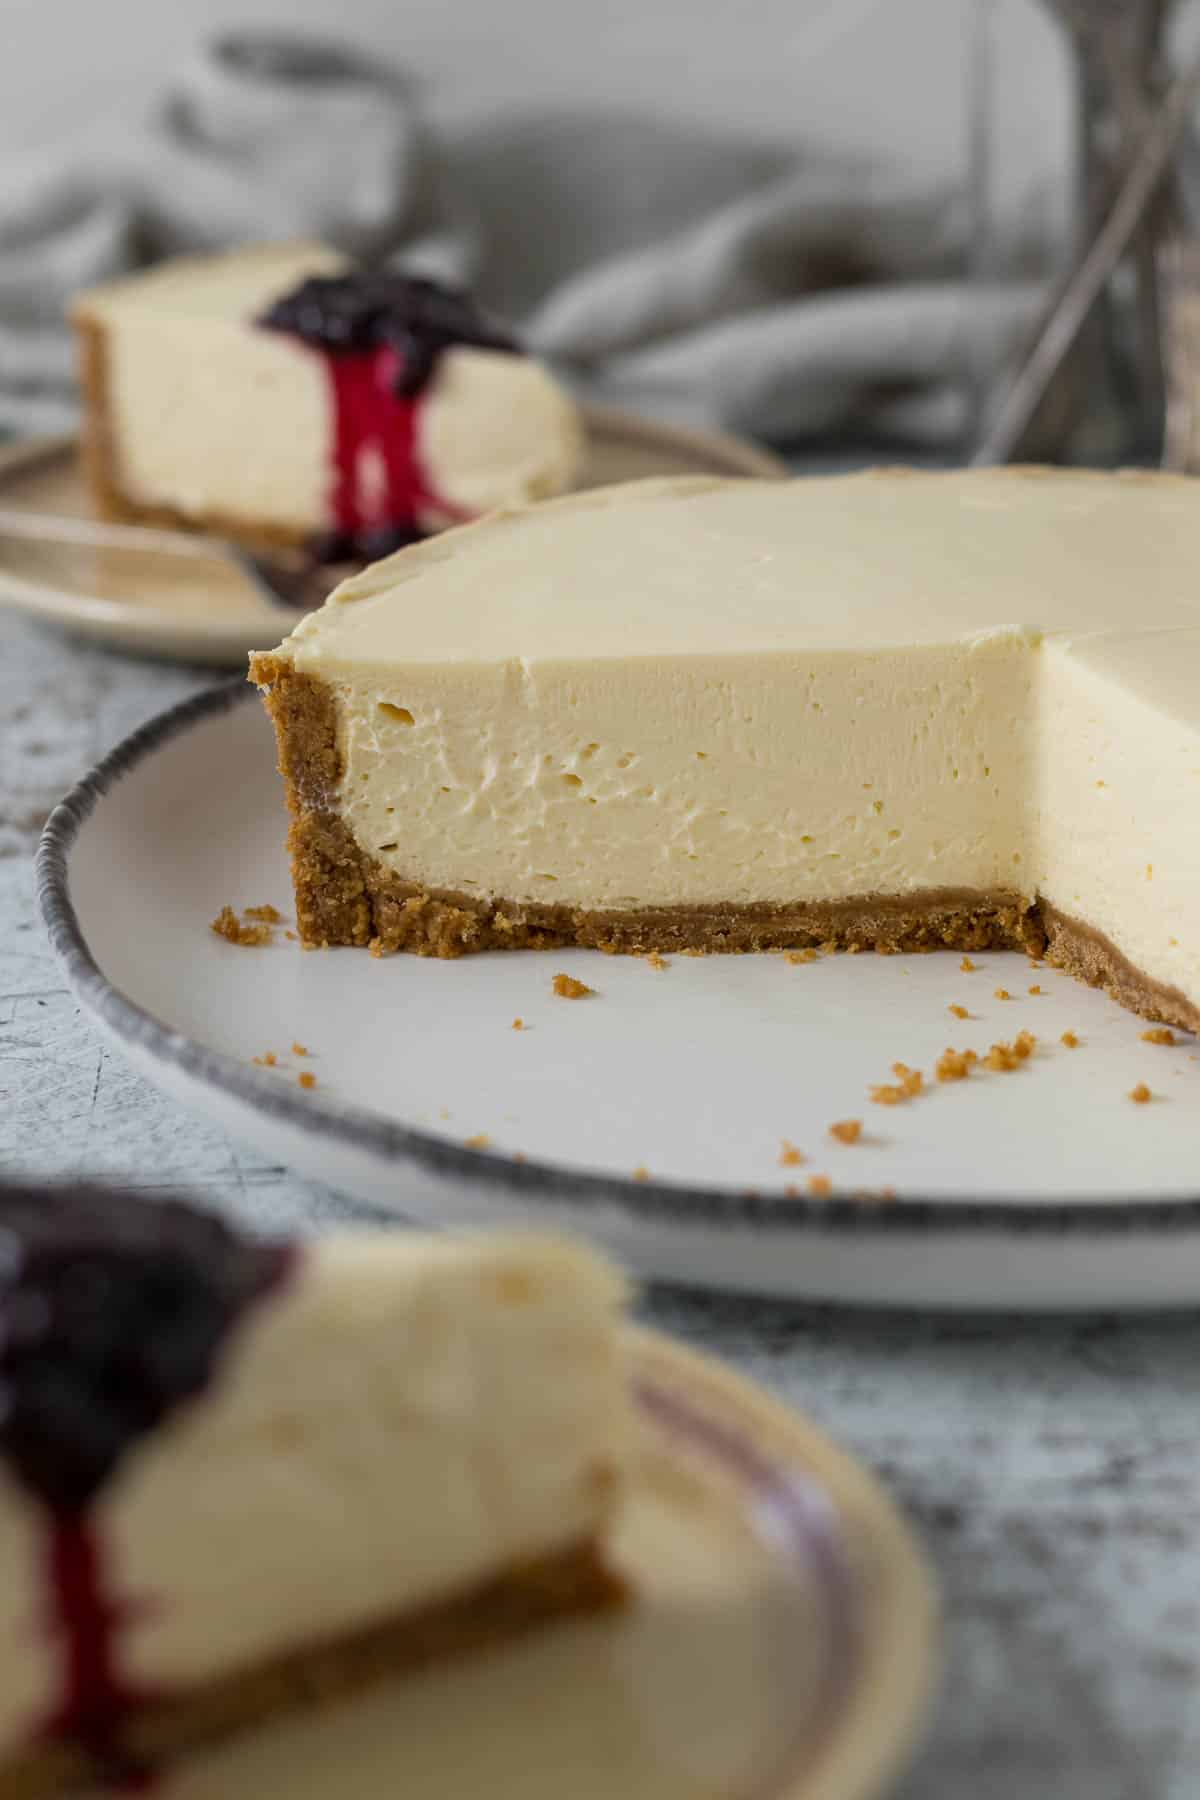 Sliced no bake cheesecake on a platter showing cross-section of biscuit base and creamy filling.